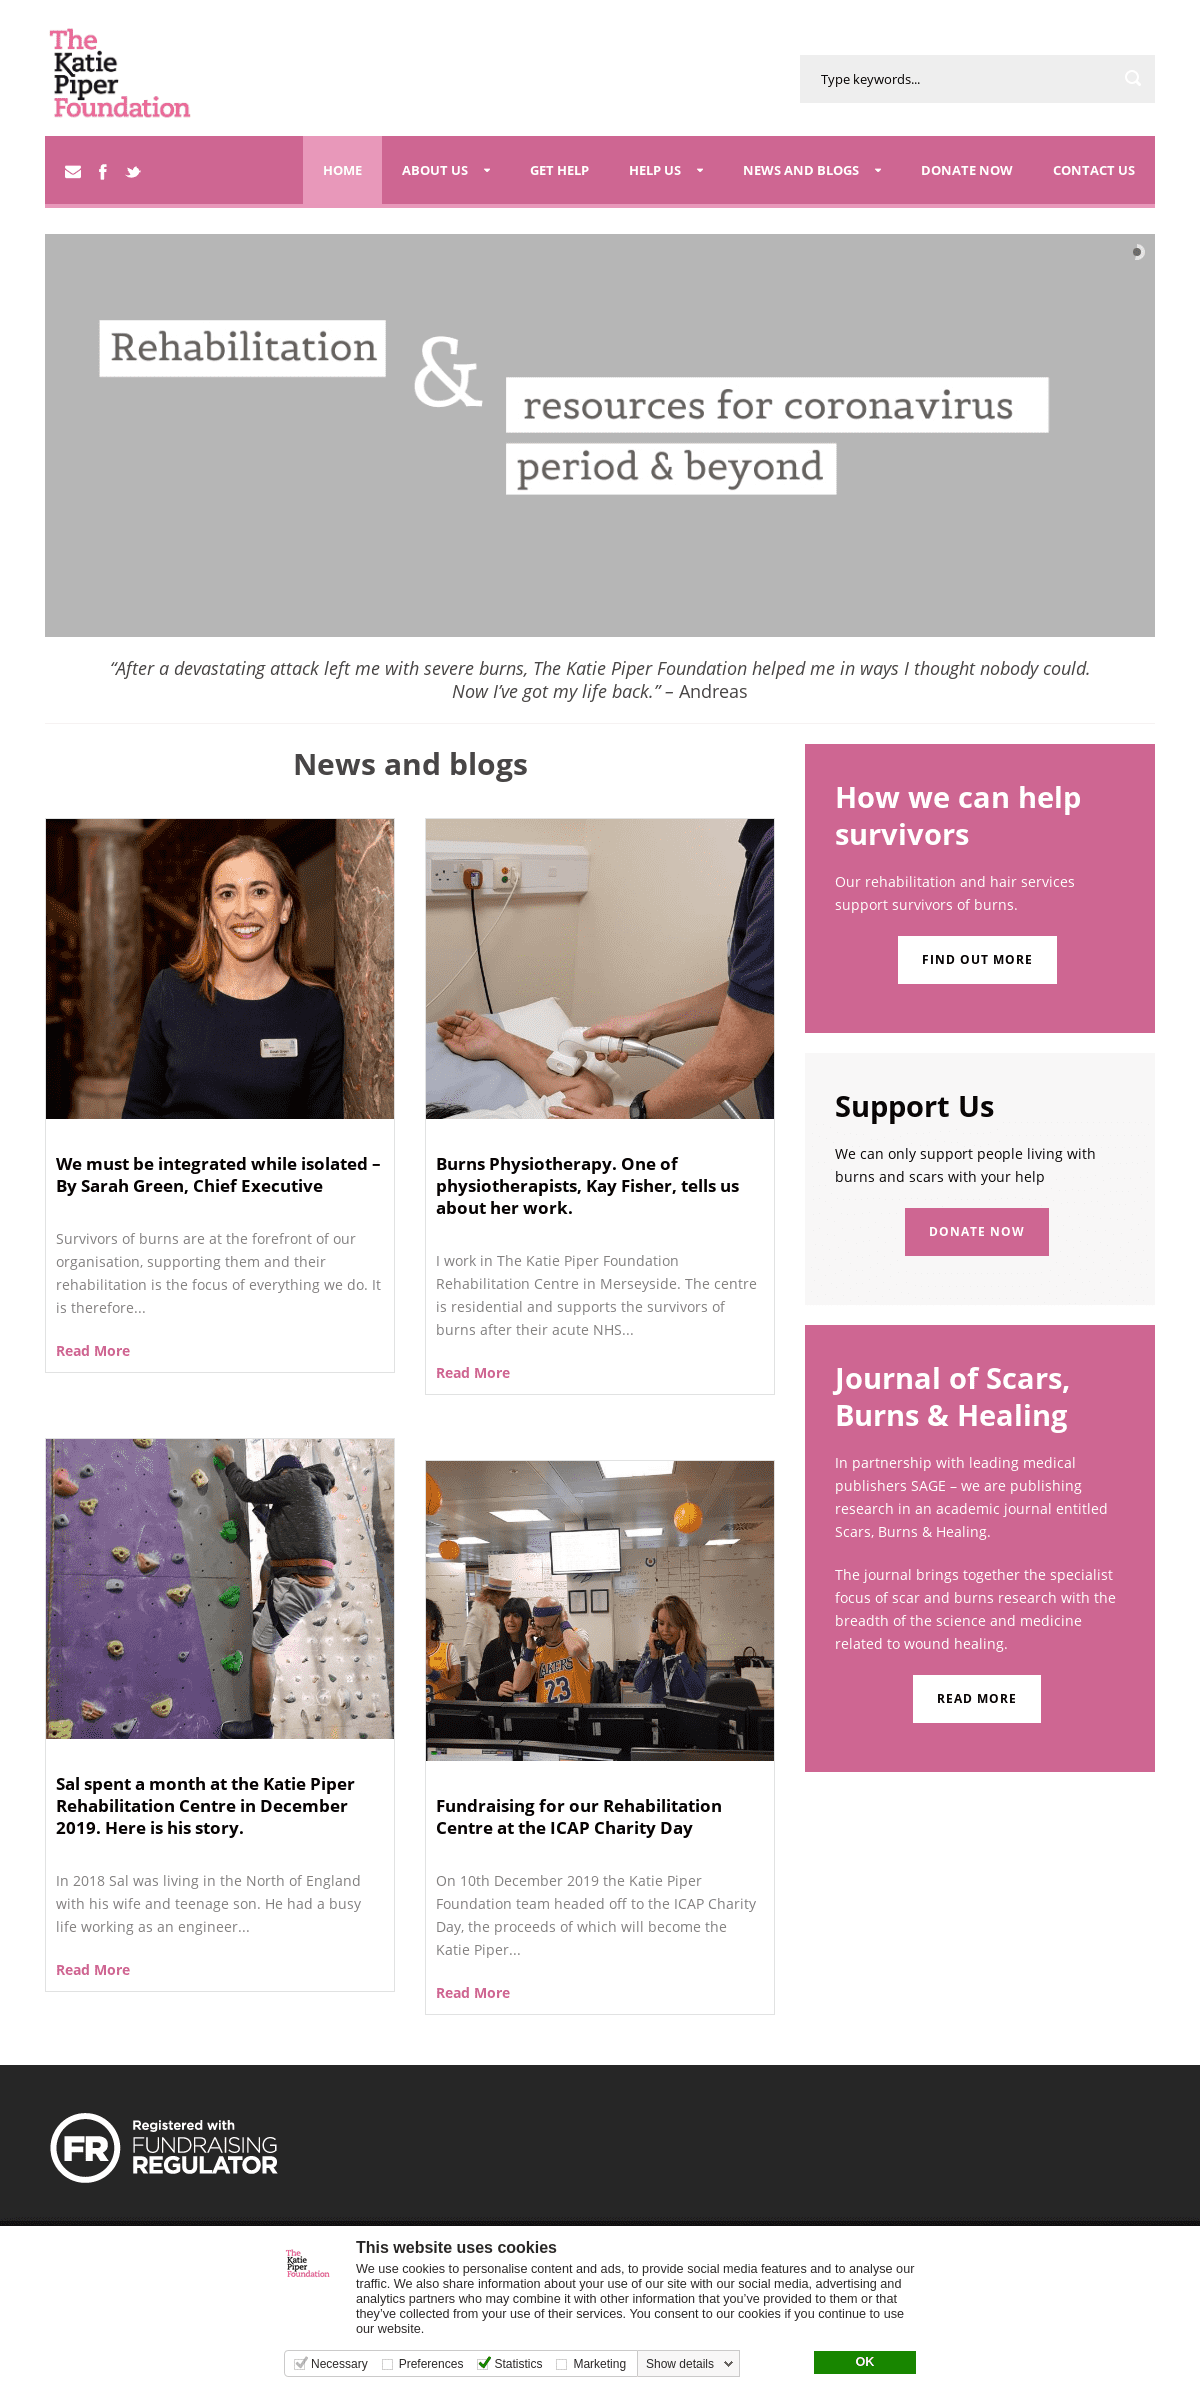 A complete backup of katiepiperfoundation.org.uk